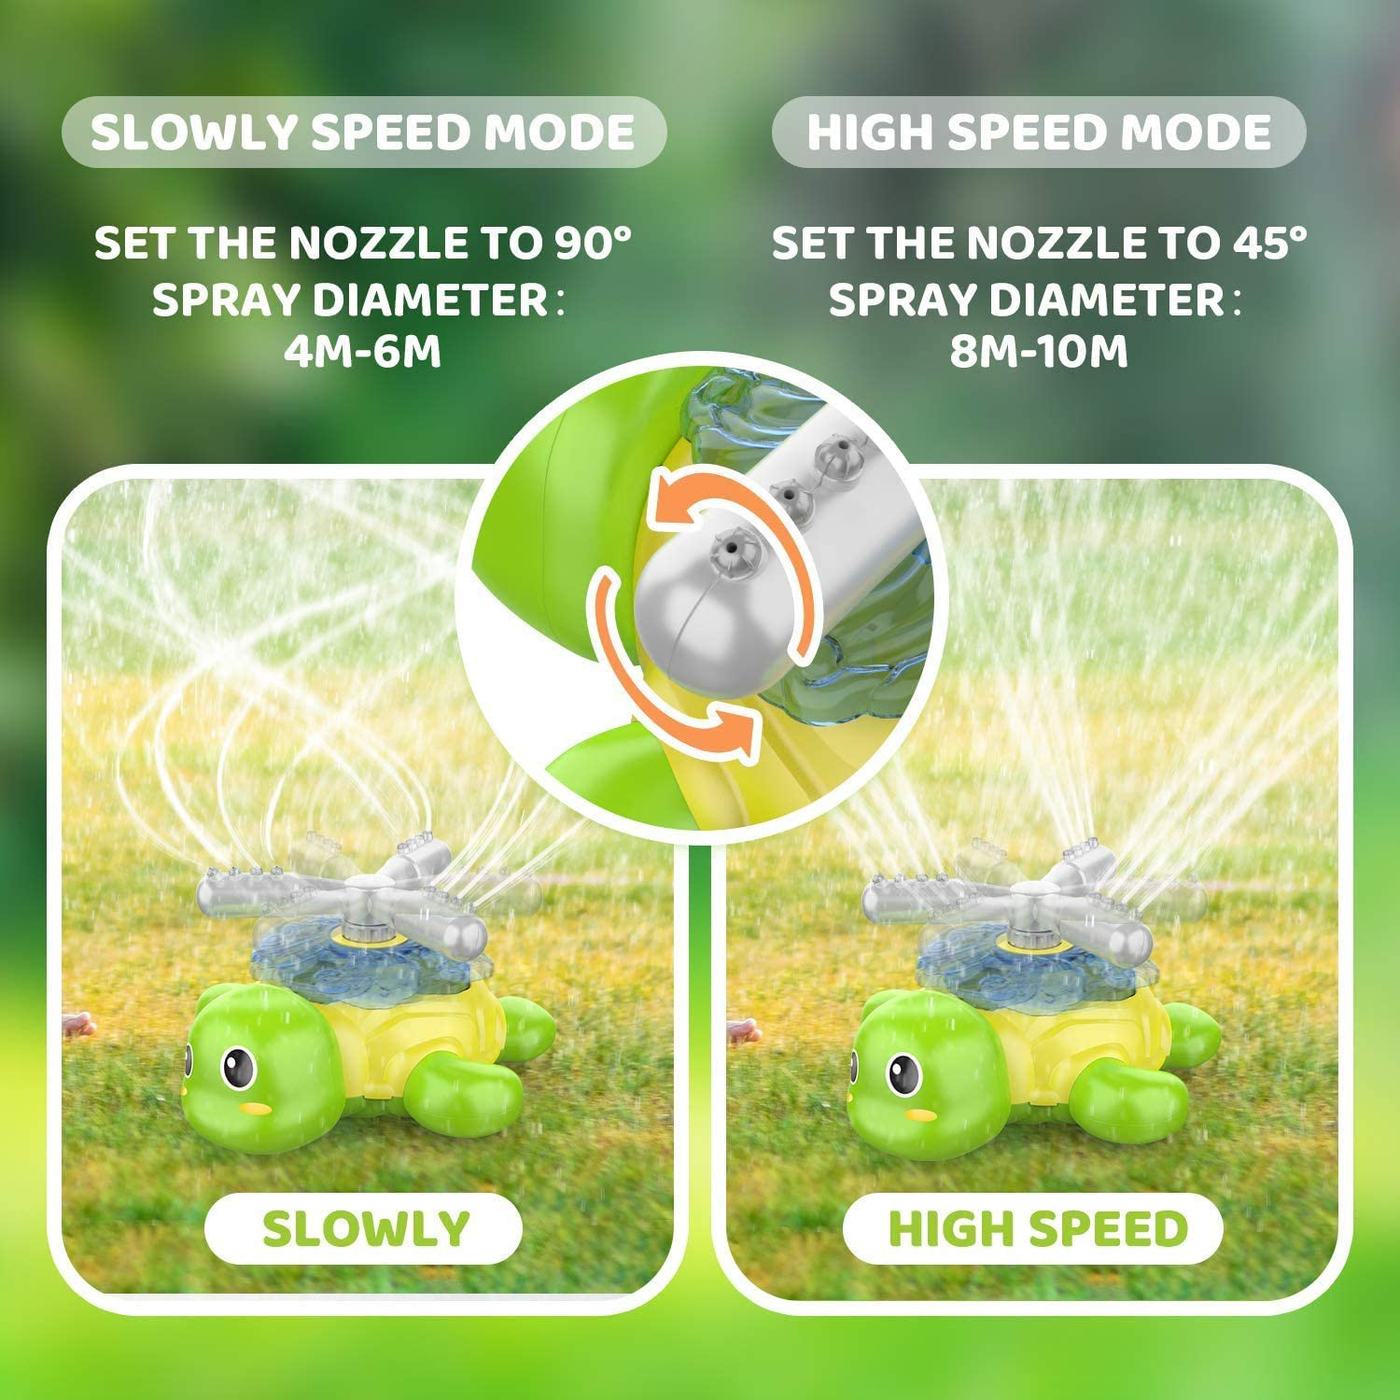 KMUYSL Spray Sprinkler for Kids, Outdoor Water Toys Gifts for 3,4,5,6,7,8 Year Old Boys & Girls Turtle Sprinkler Toy - Spinning Turtle Spray Sprinkler for Outside Lawn Backyard Yard